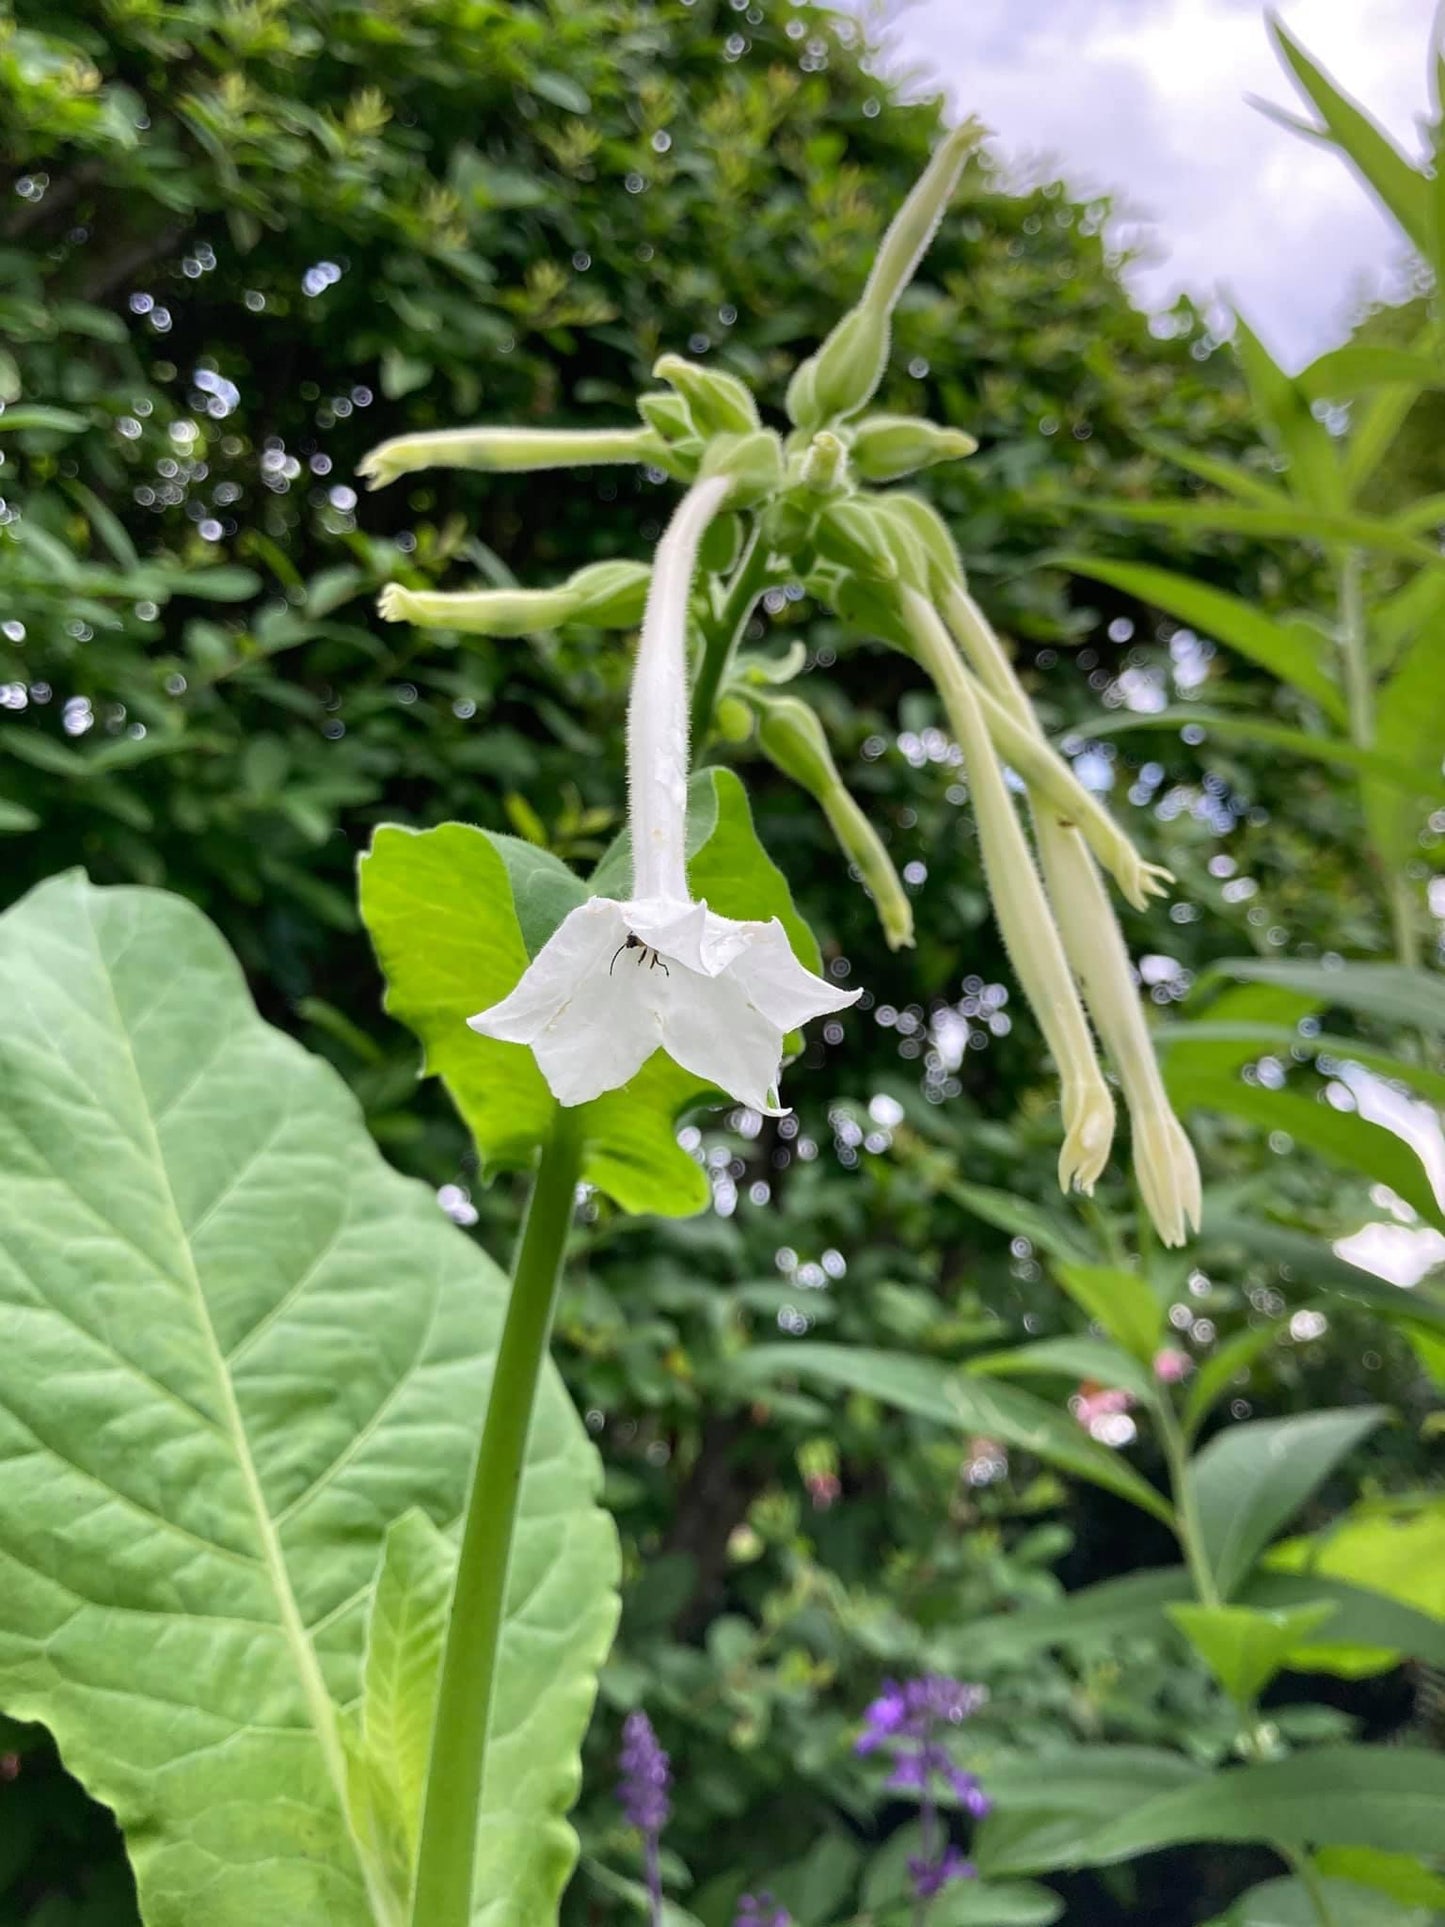 Nicotiana ‘Only the Lonely’ seeds